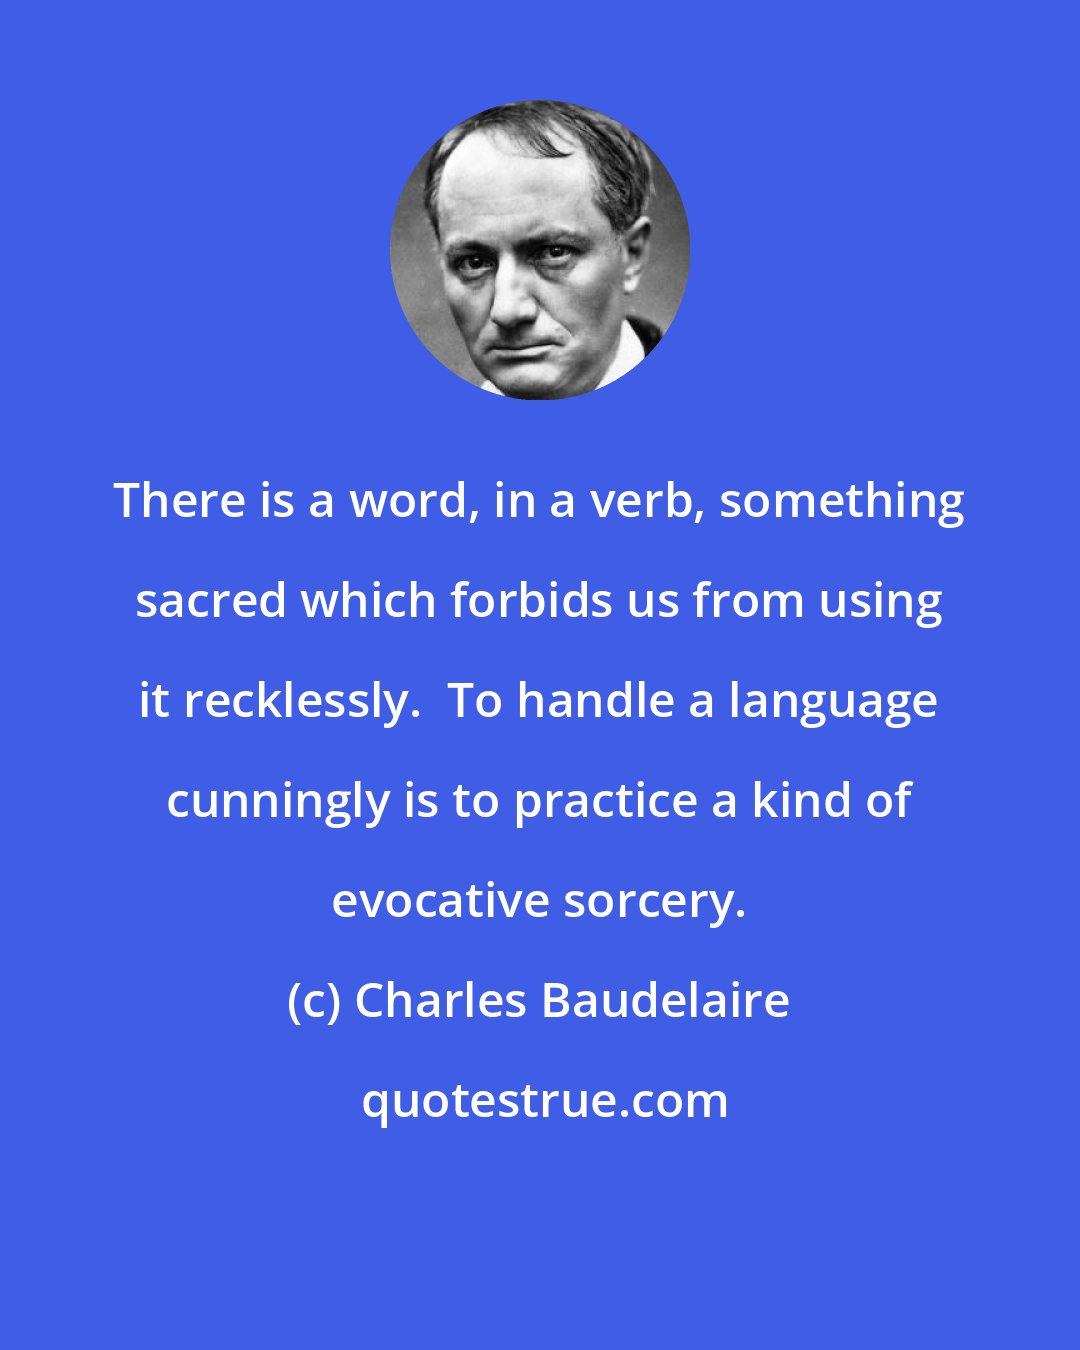 Charles Baudelaire: There is a word, in a verb, something sacred which forbids us from using it recklessly.  To handle a language cunningly is to practice a kind of evocative sorcery.